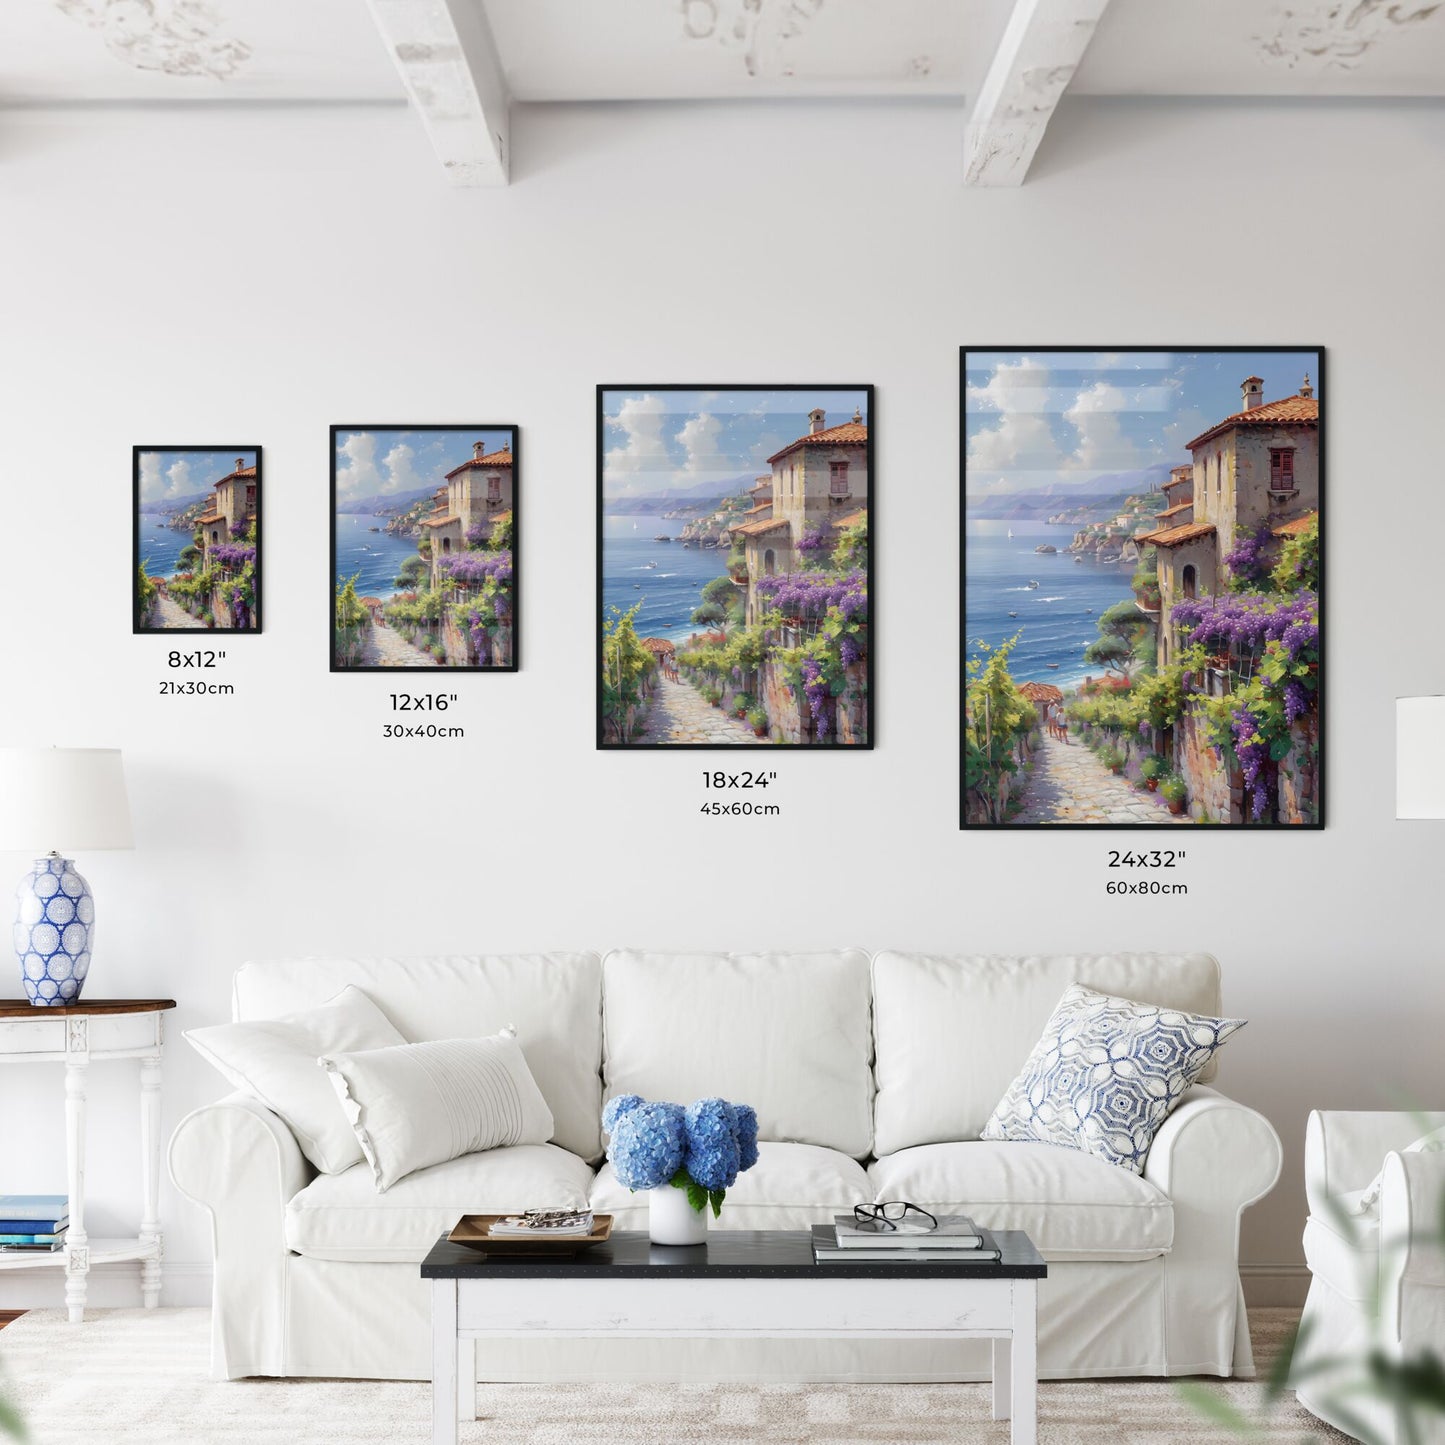 A picture of a Sicilian vineyard - Art print of a painting of a town by the sea Default Title